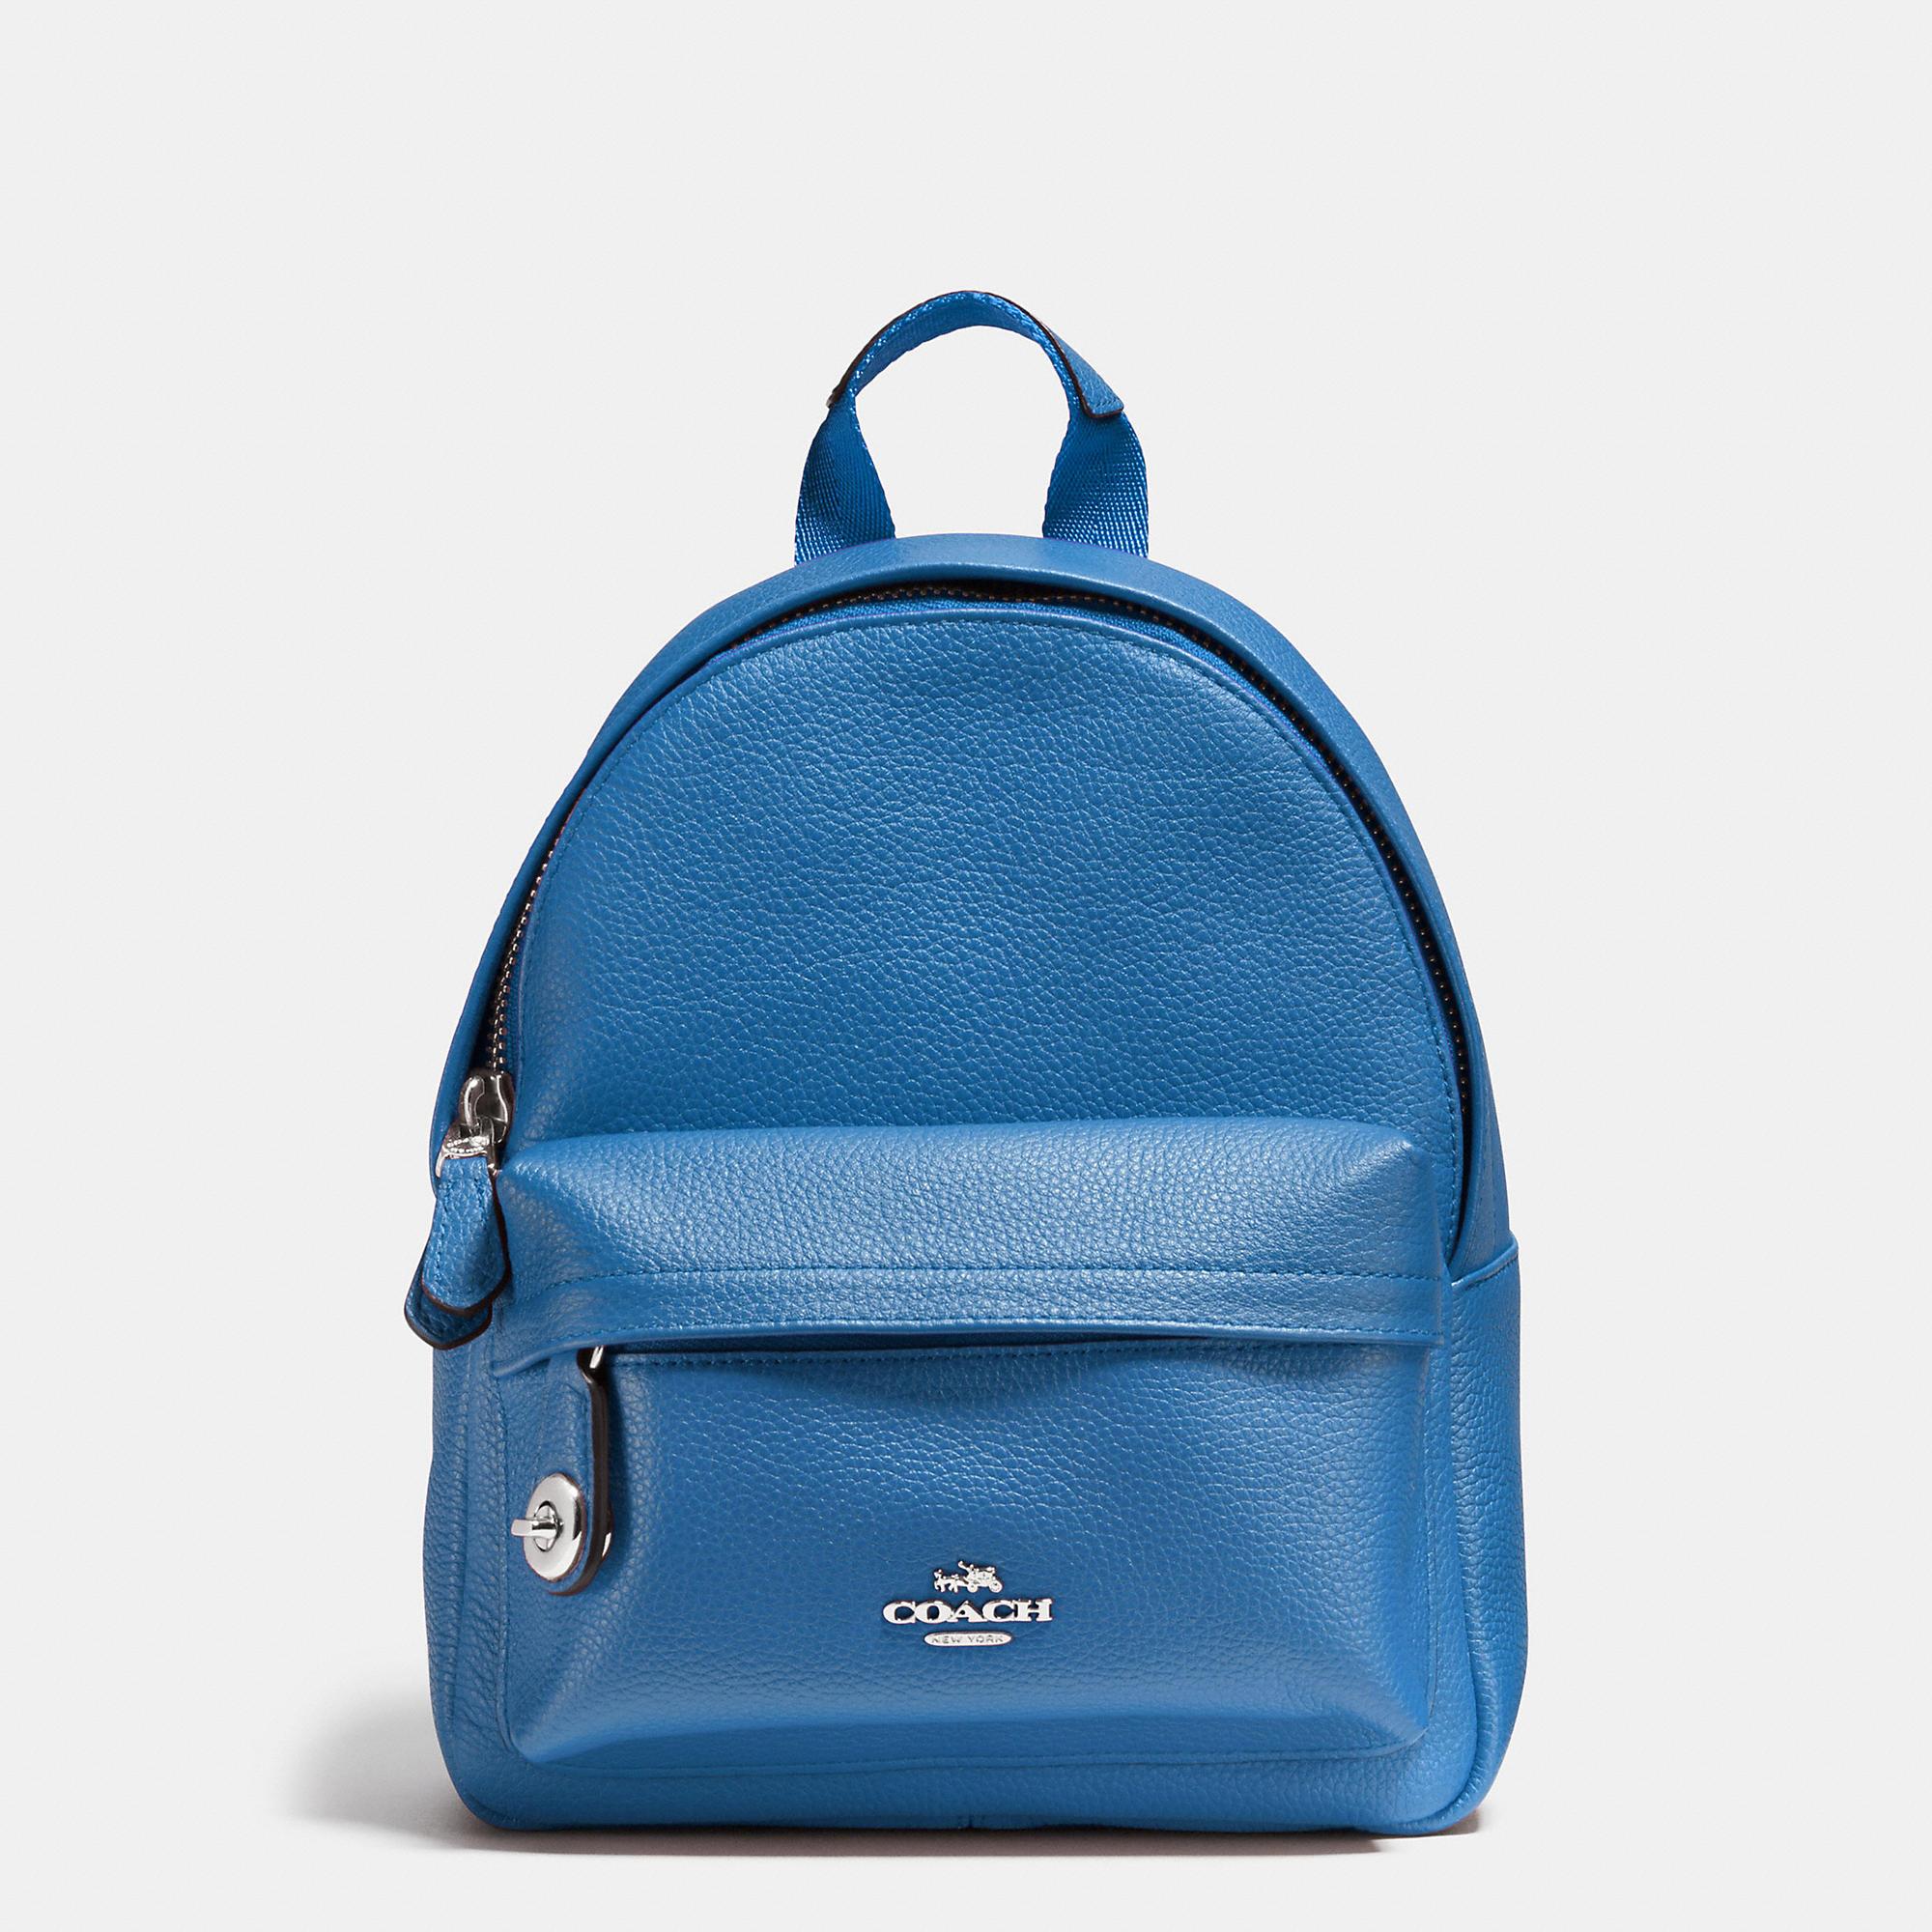 COACH Mini Campus Backpack In Polished Pebble Leather in Blue - Lyst